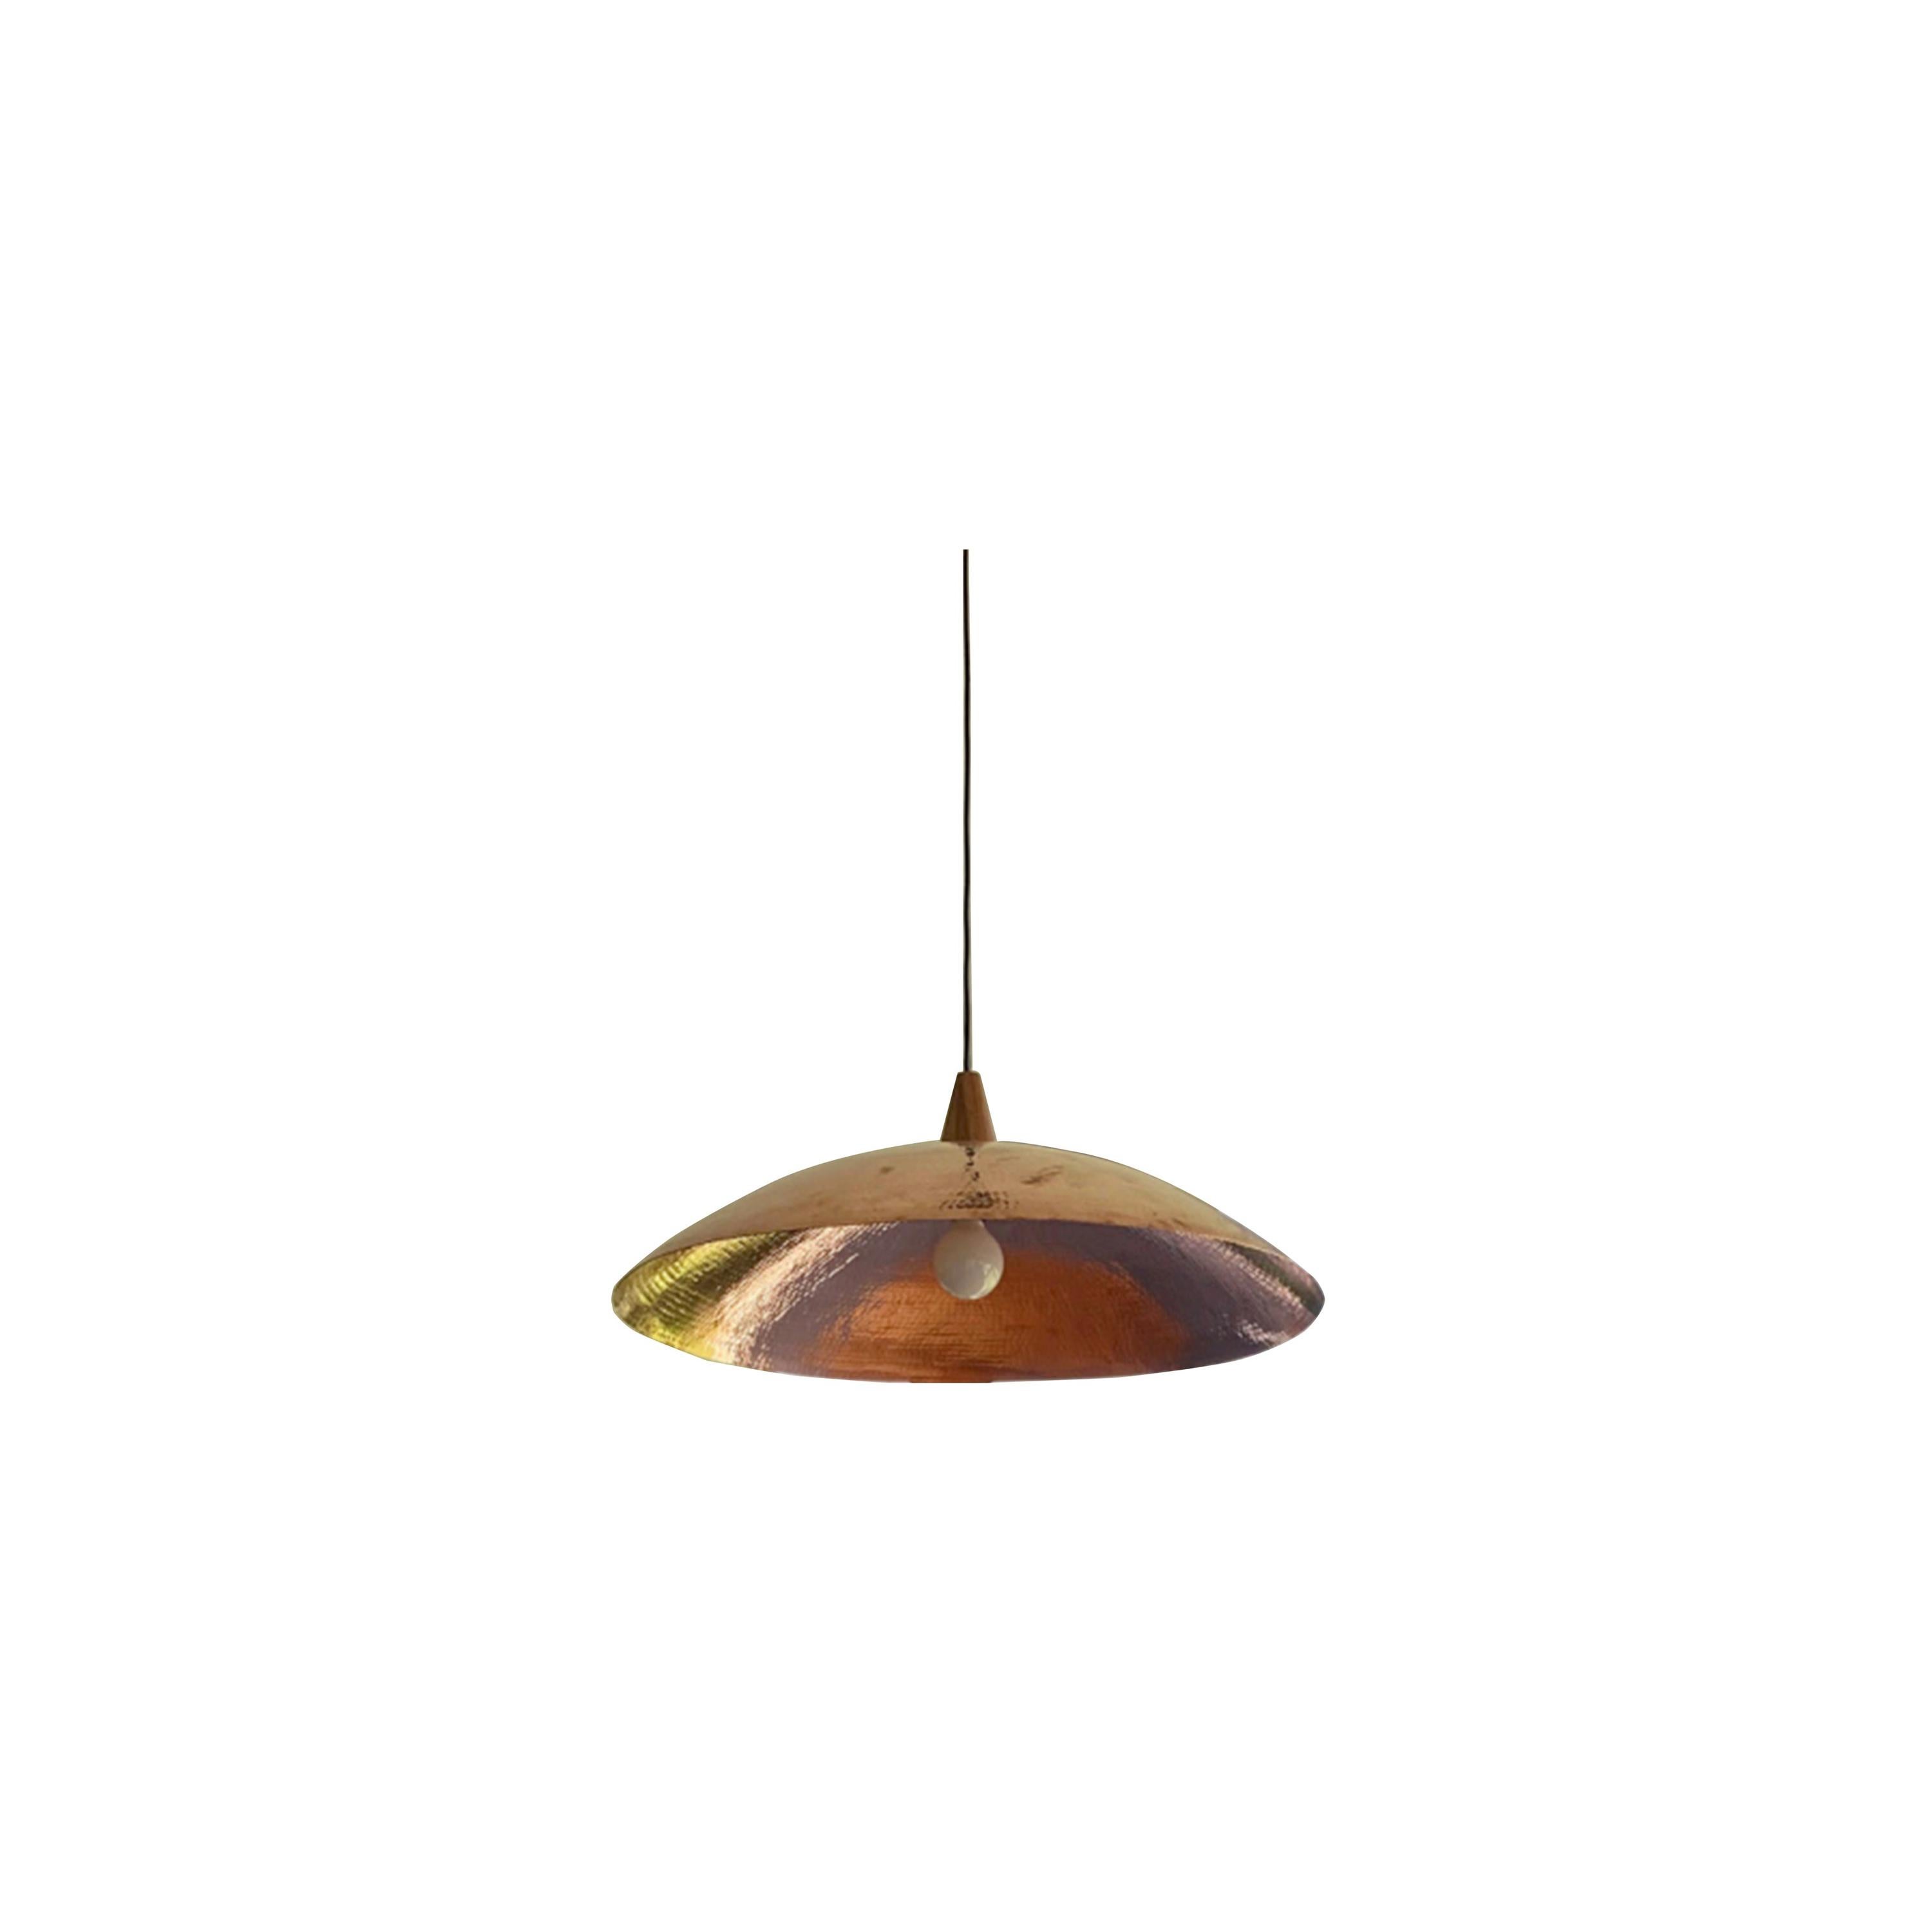 Plato Abajo 80 Pendant Lamp, Maria Beckmann, Represented by Tuleste Factory For Sale